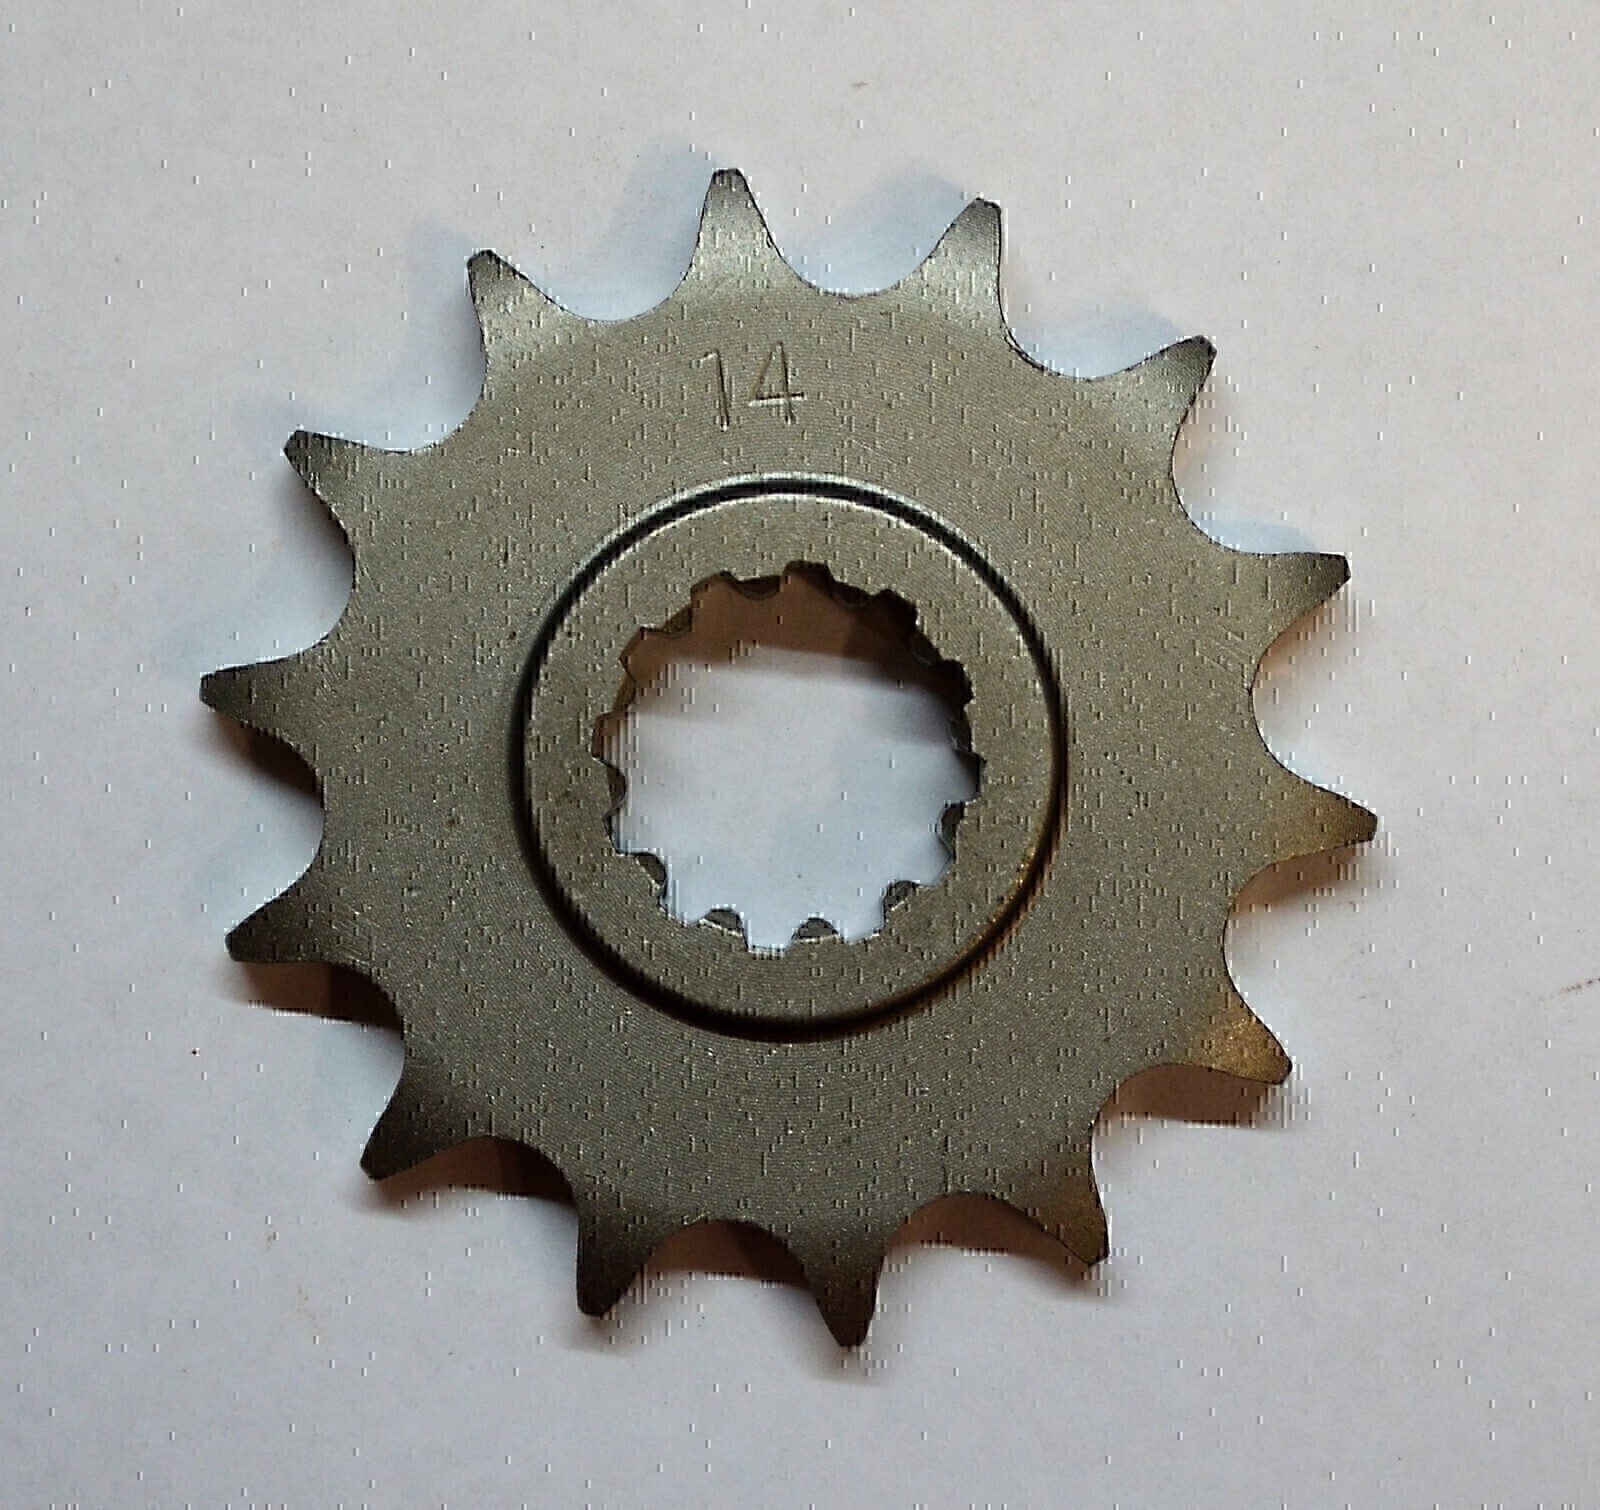 14 TOOTH FRONT SPROCKET FOR HONDA CR80 CR85 1986 - 2007 